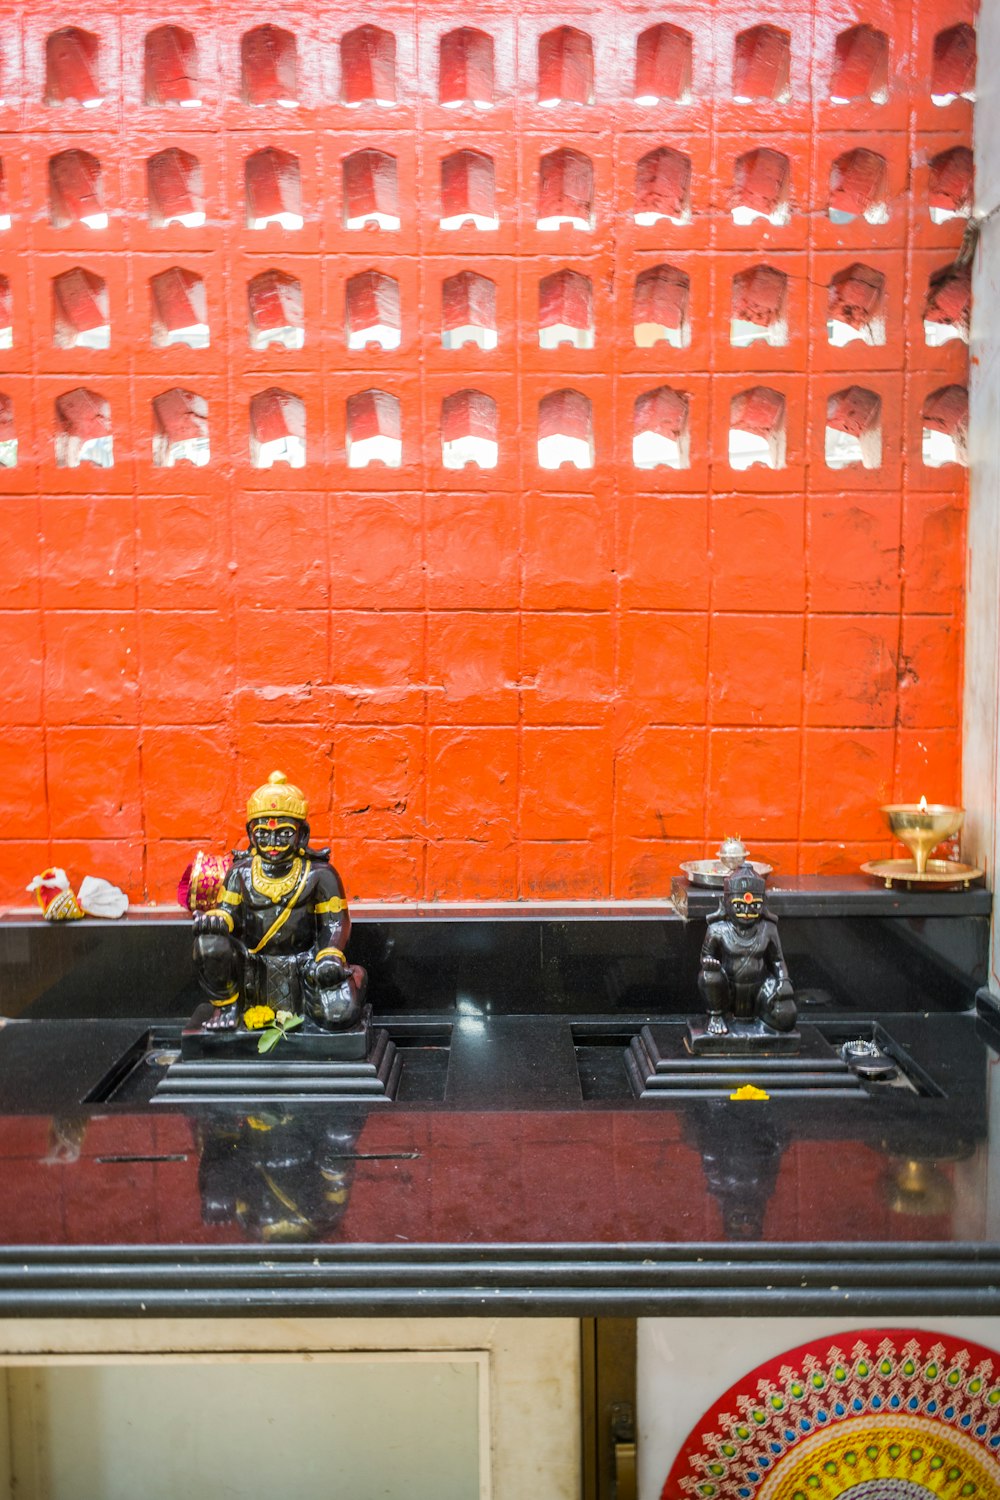 a couple of figurines sitting on top of a counter